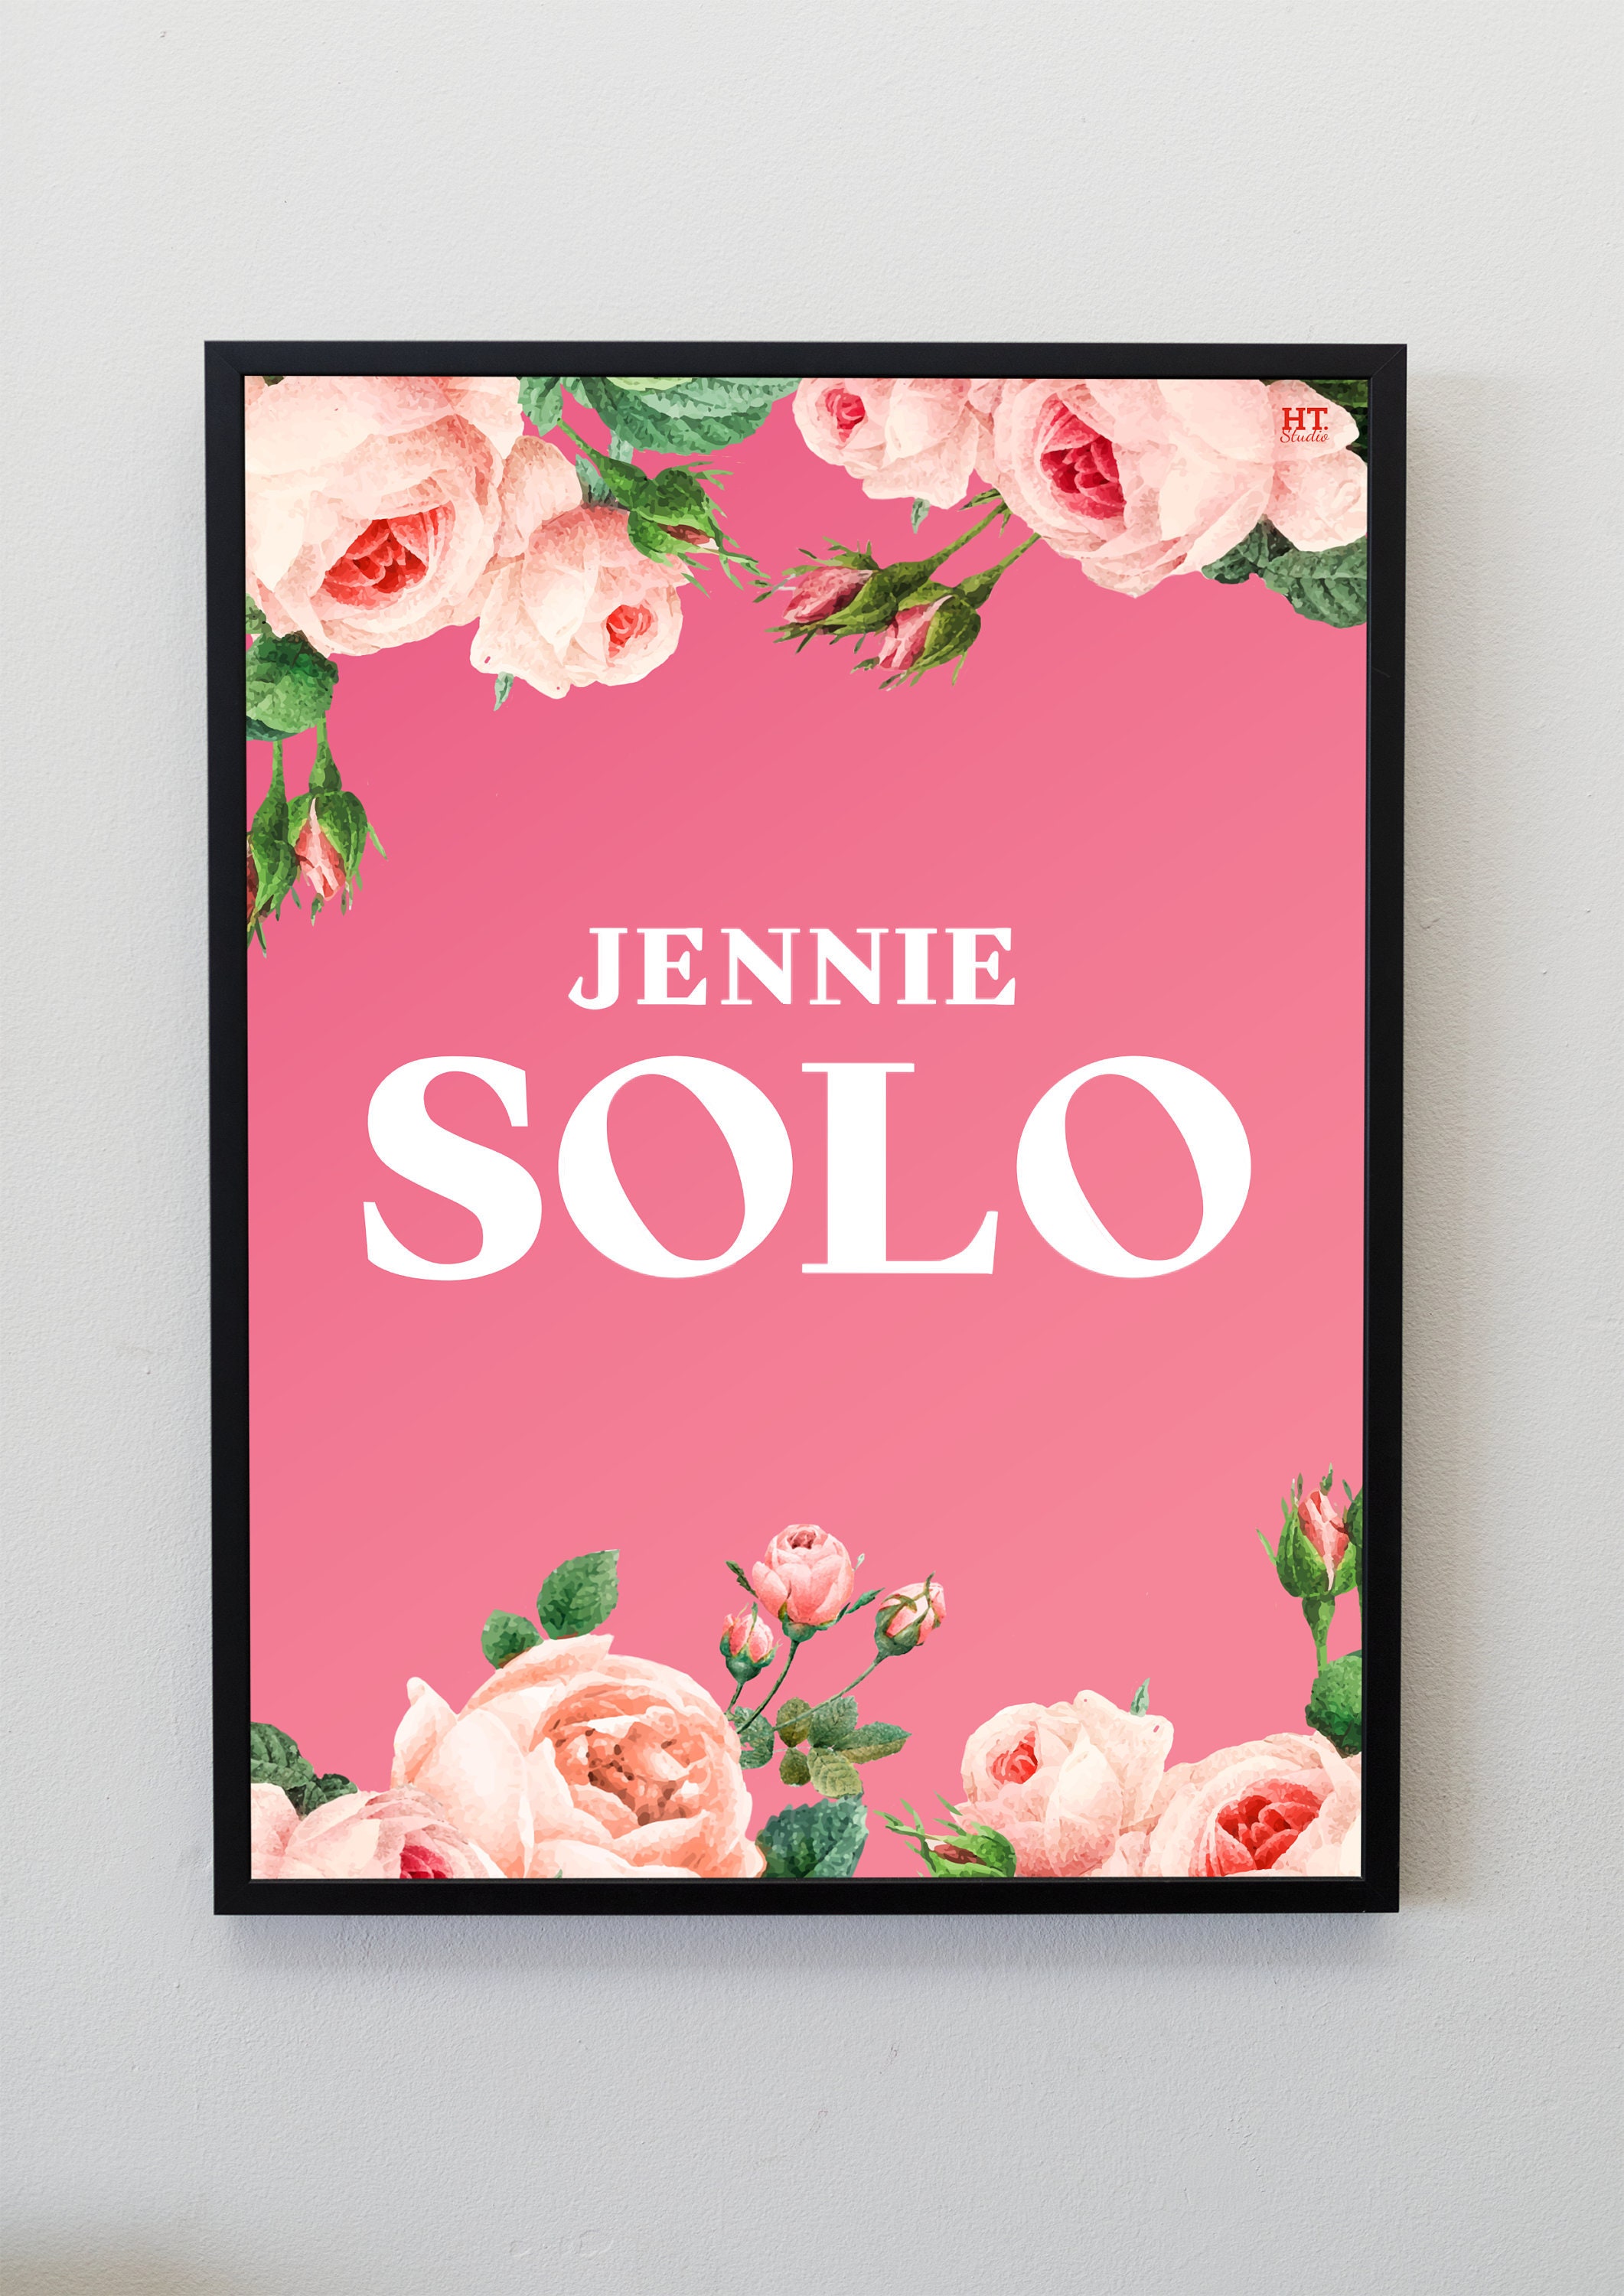 Buy　Jennie　India　Solo　Online　Kpop　In　Etsy　India